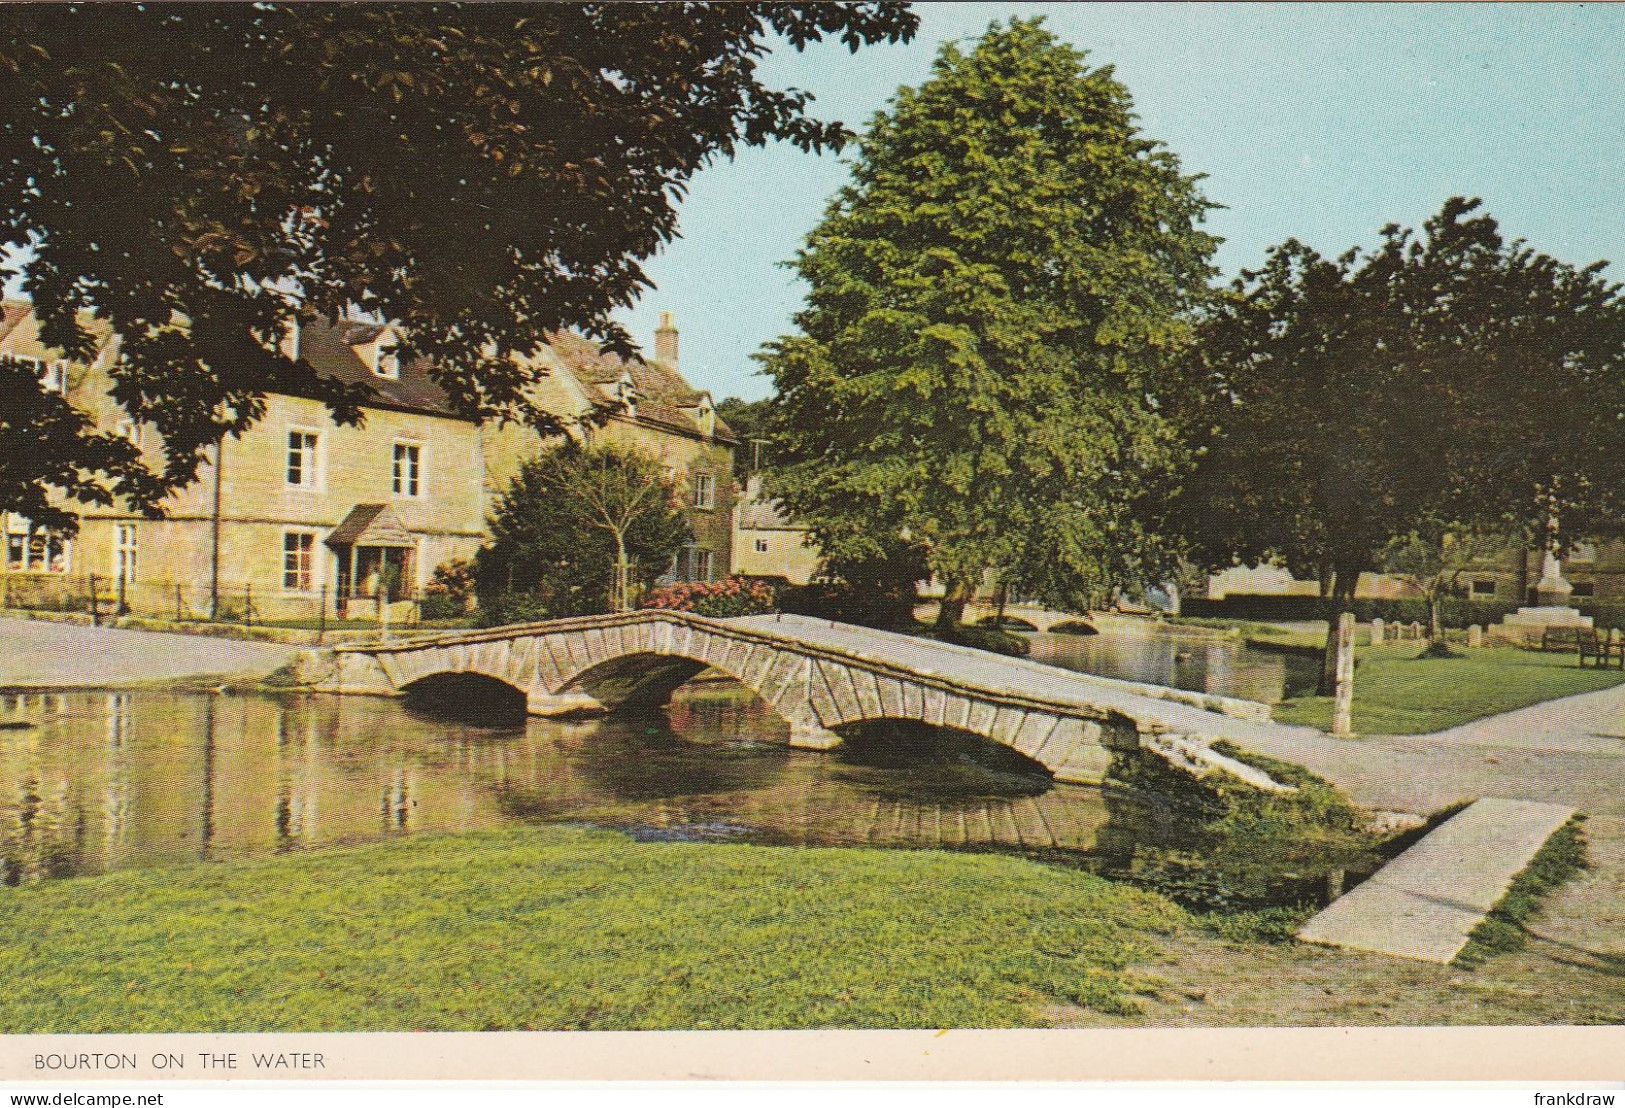 Postcard - Bourton On The Water - No Card No - Very Good - Unclassified